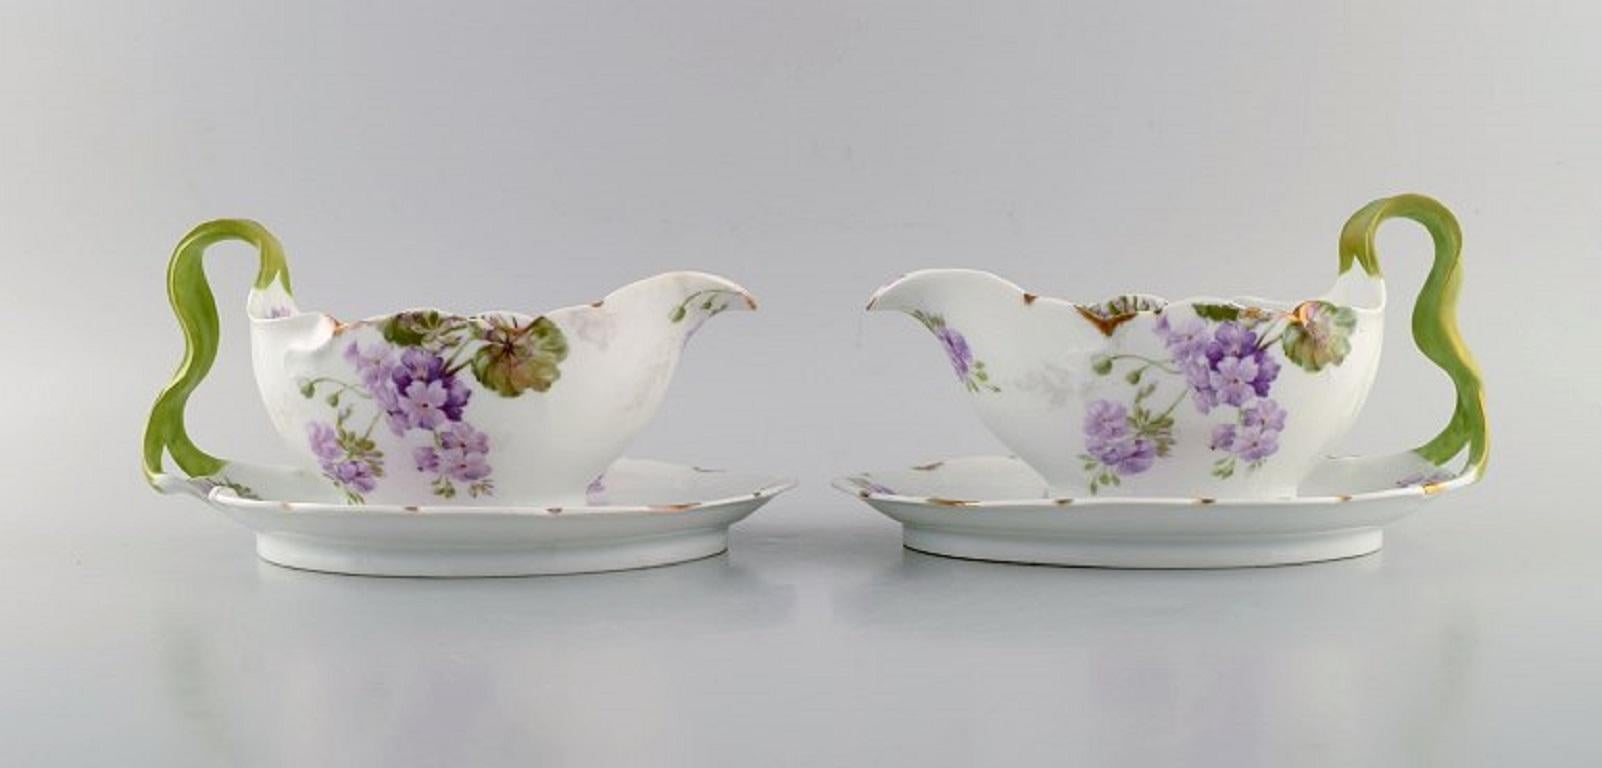 Rosenthal, Germany. 
Two Iris sauce boats in hand-painted porcelain with flowers and gold edge. 
Handles modelled as foliage. 1920s.
Measures: 23 x 15 x 11.5 cm.
In excellent condition.
Stamped.